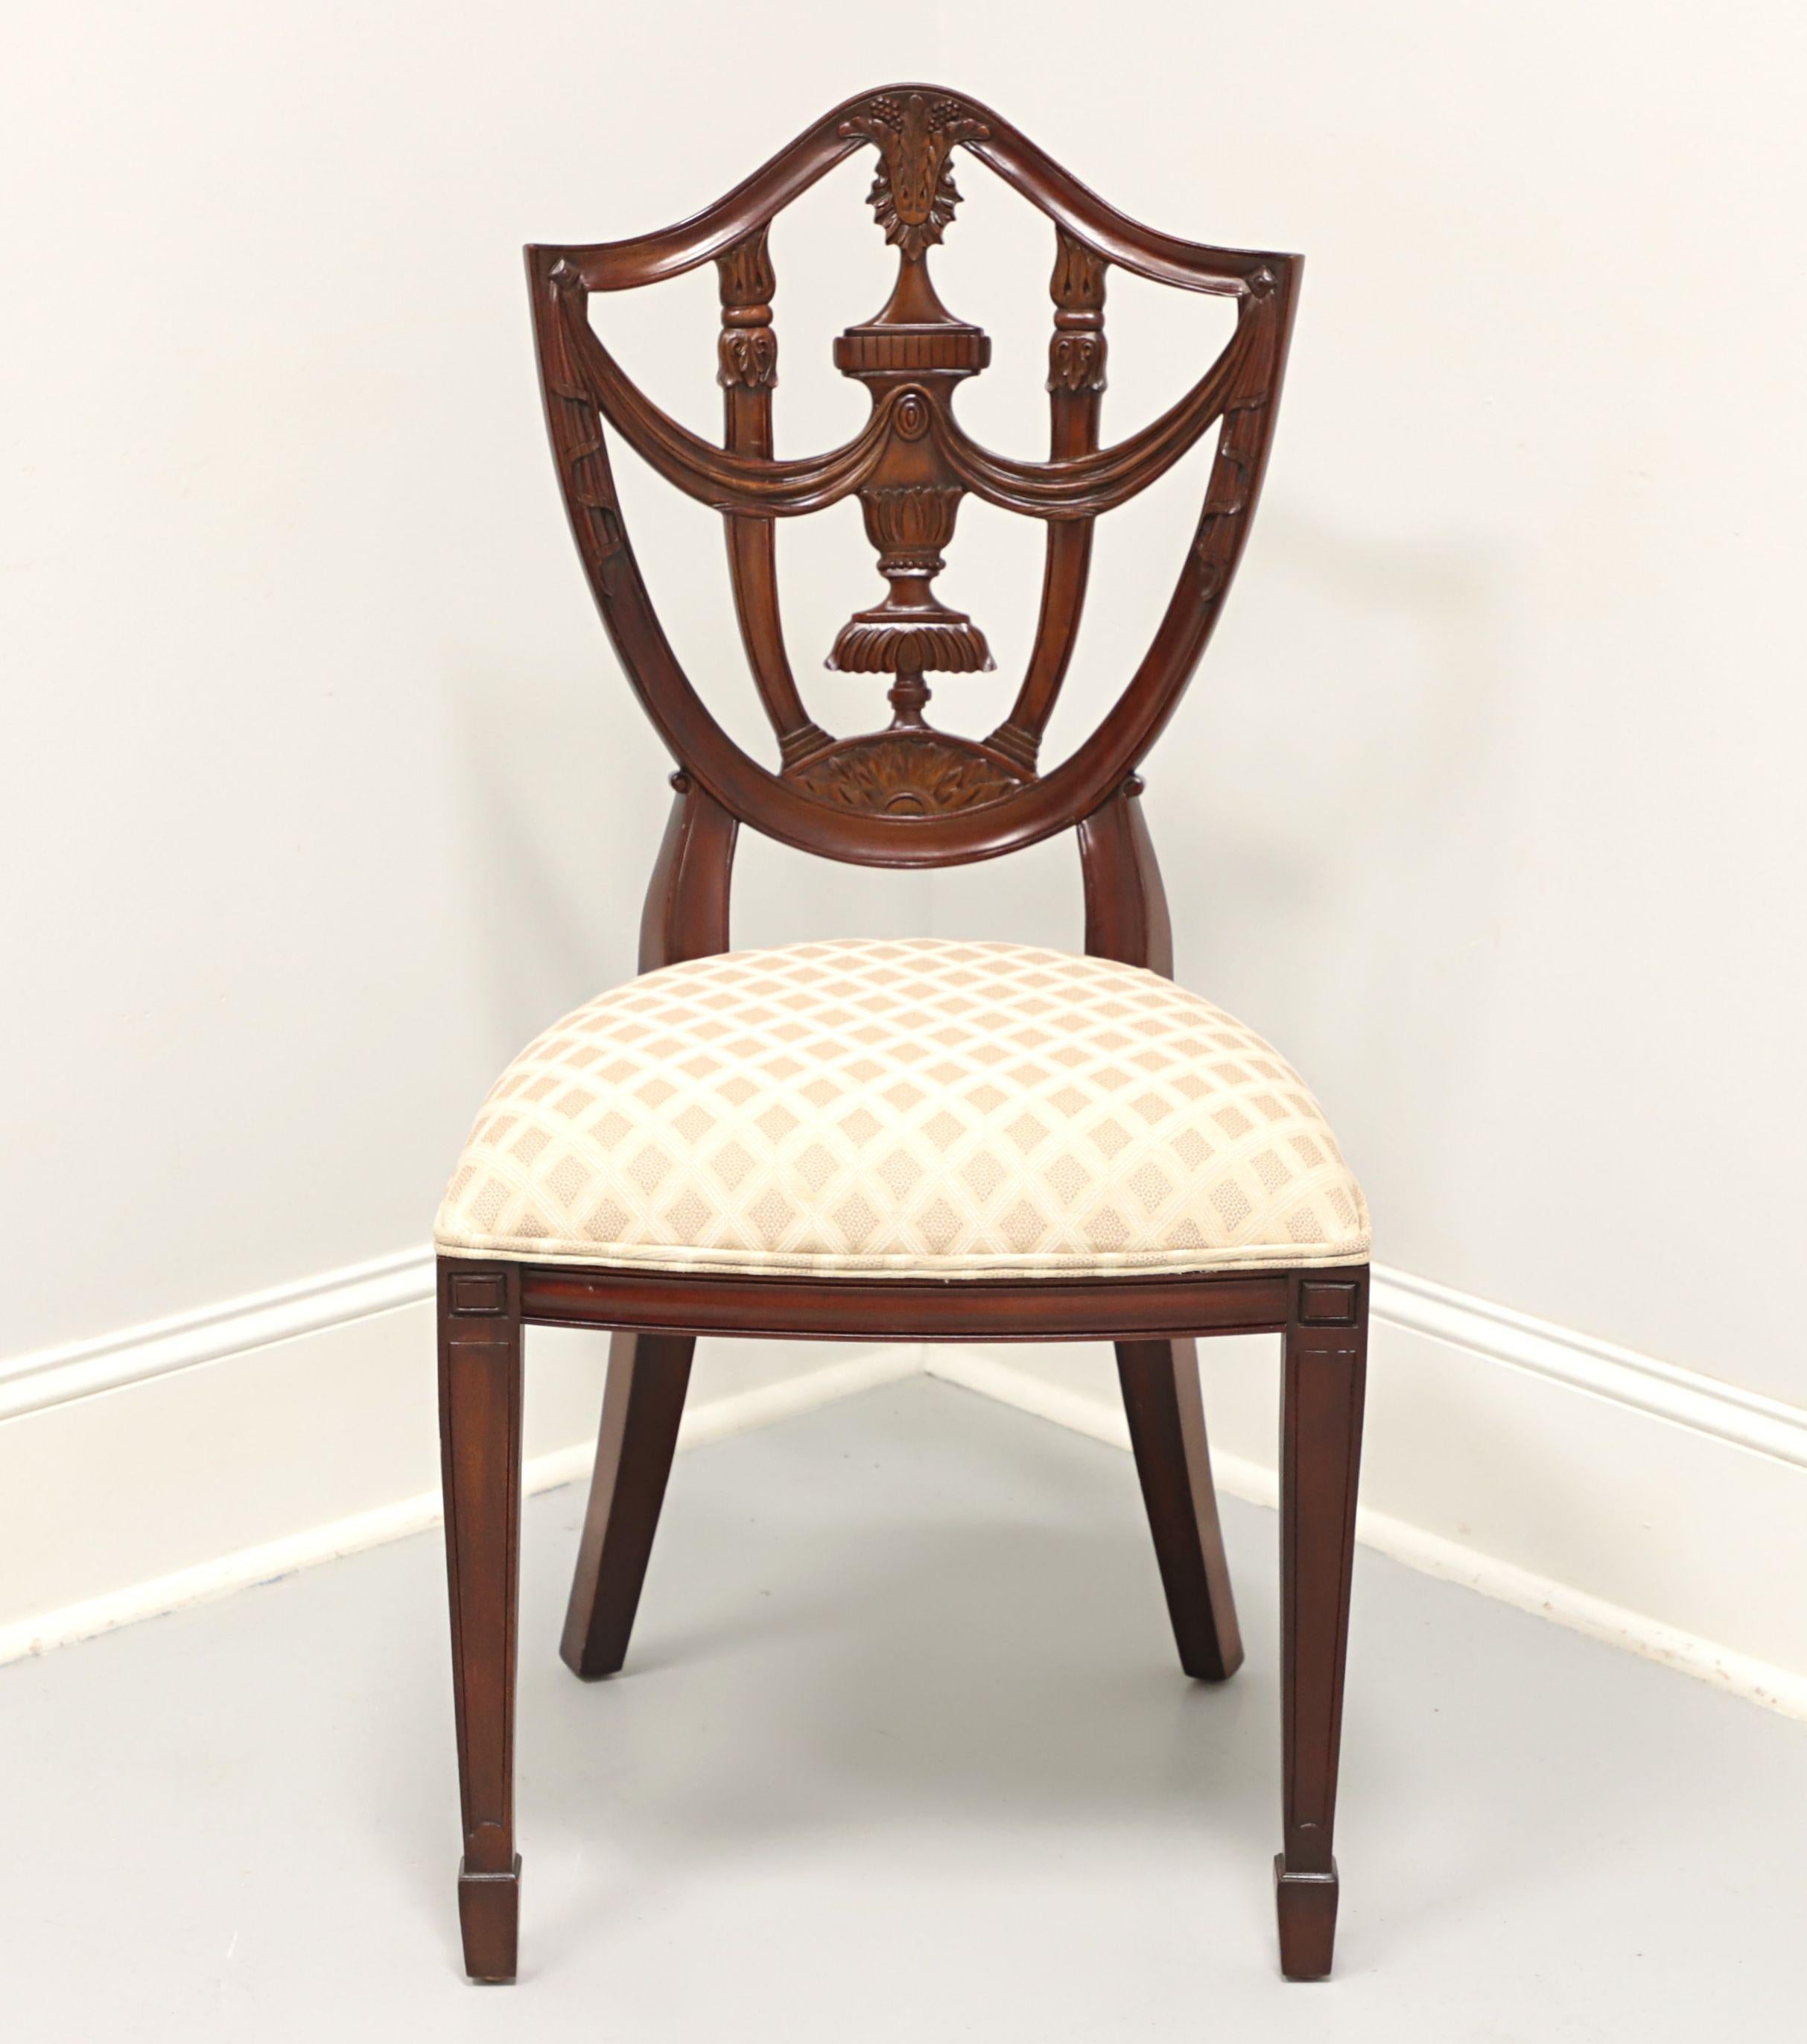 A Hepplewhite style dining side chair by Maitland Smith. Mahogany with decoratively carved back, cream & gold color patterned fabric upholstered seat, straight legs and spade feet. Made in Indonesia, in the late 20th century.

Measures: Overall: